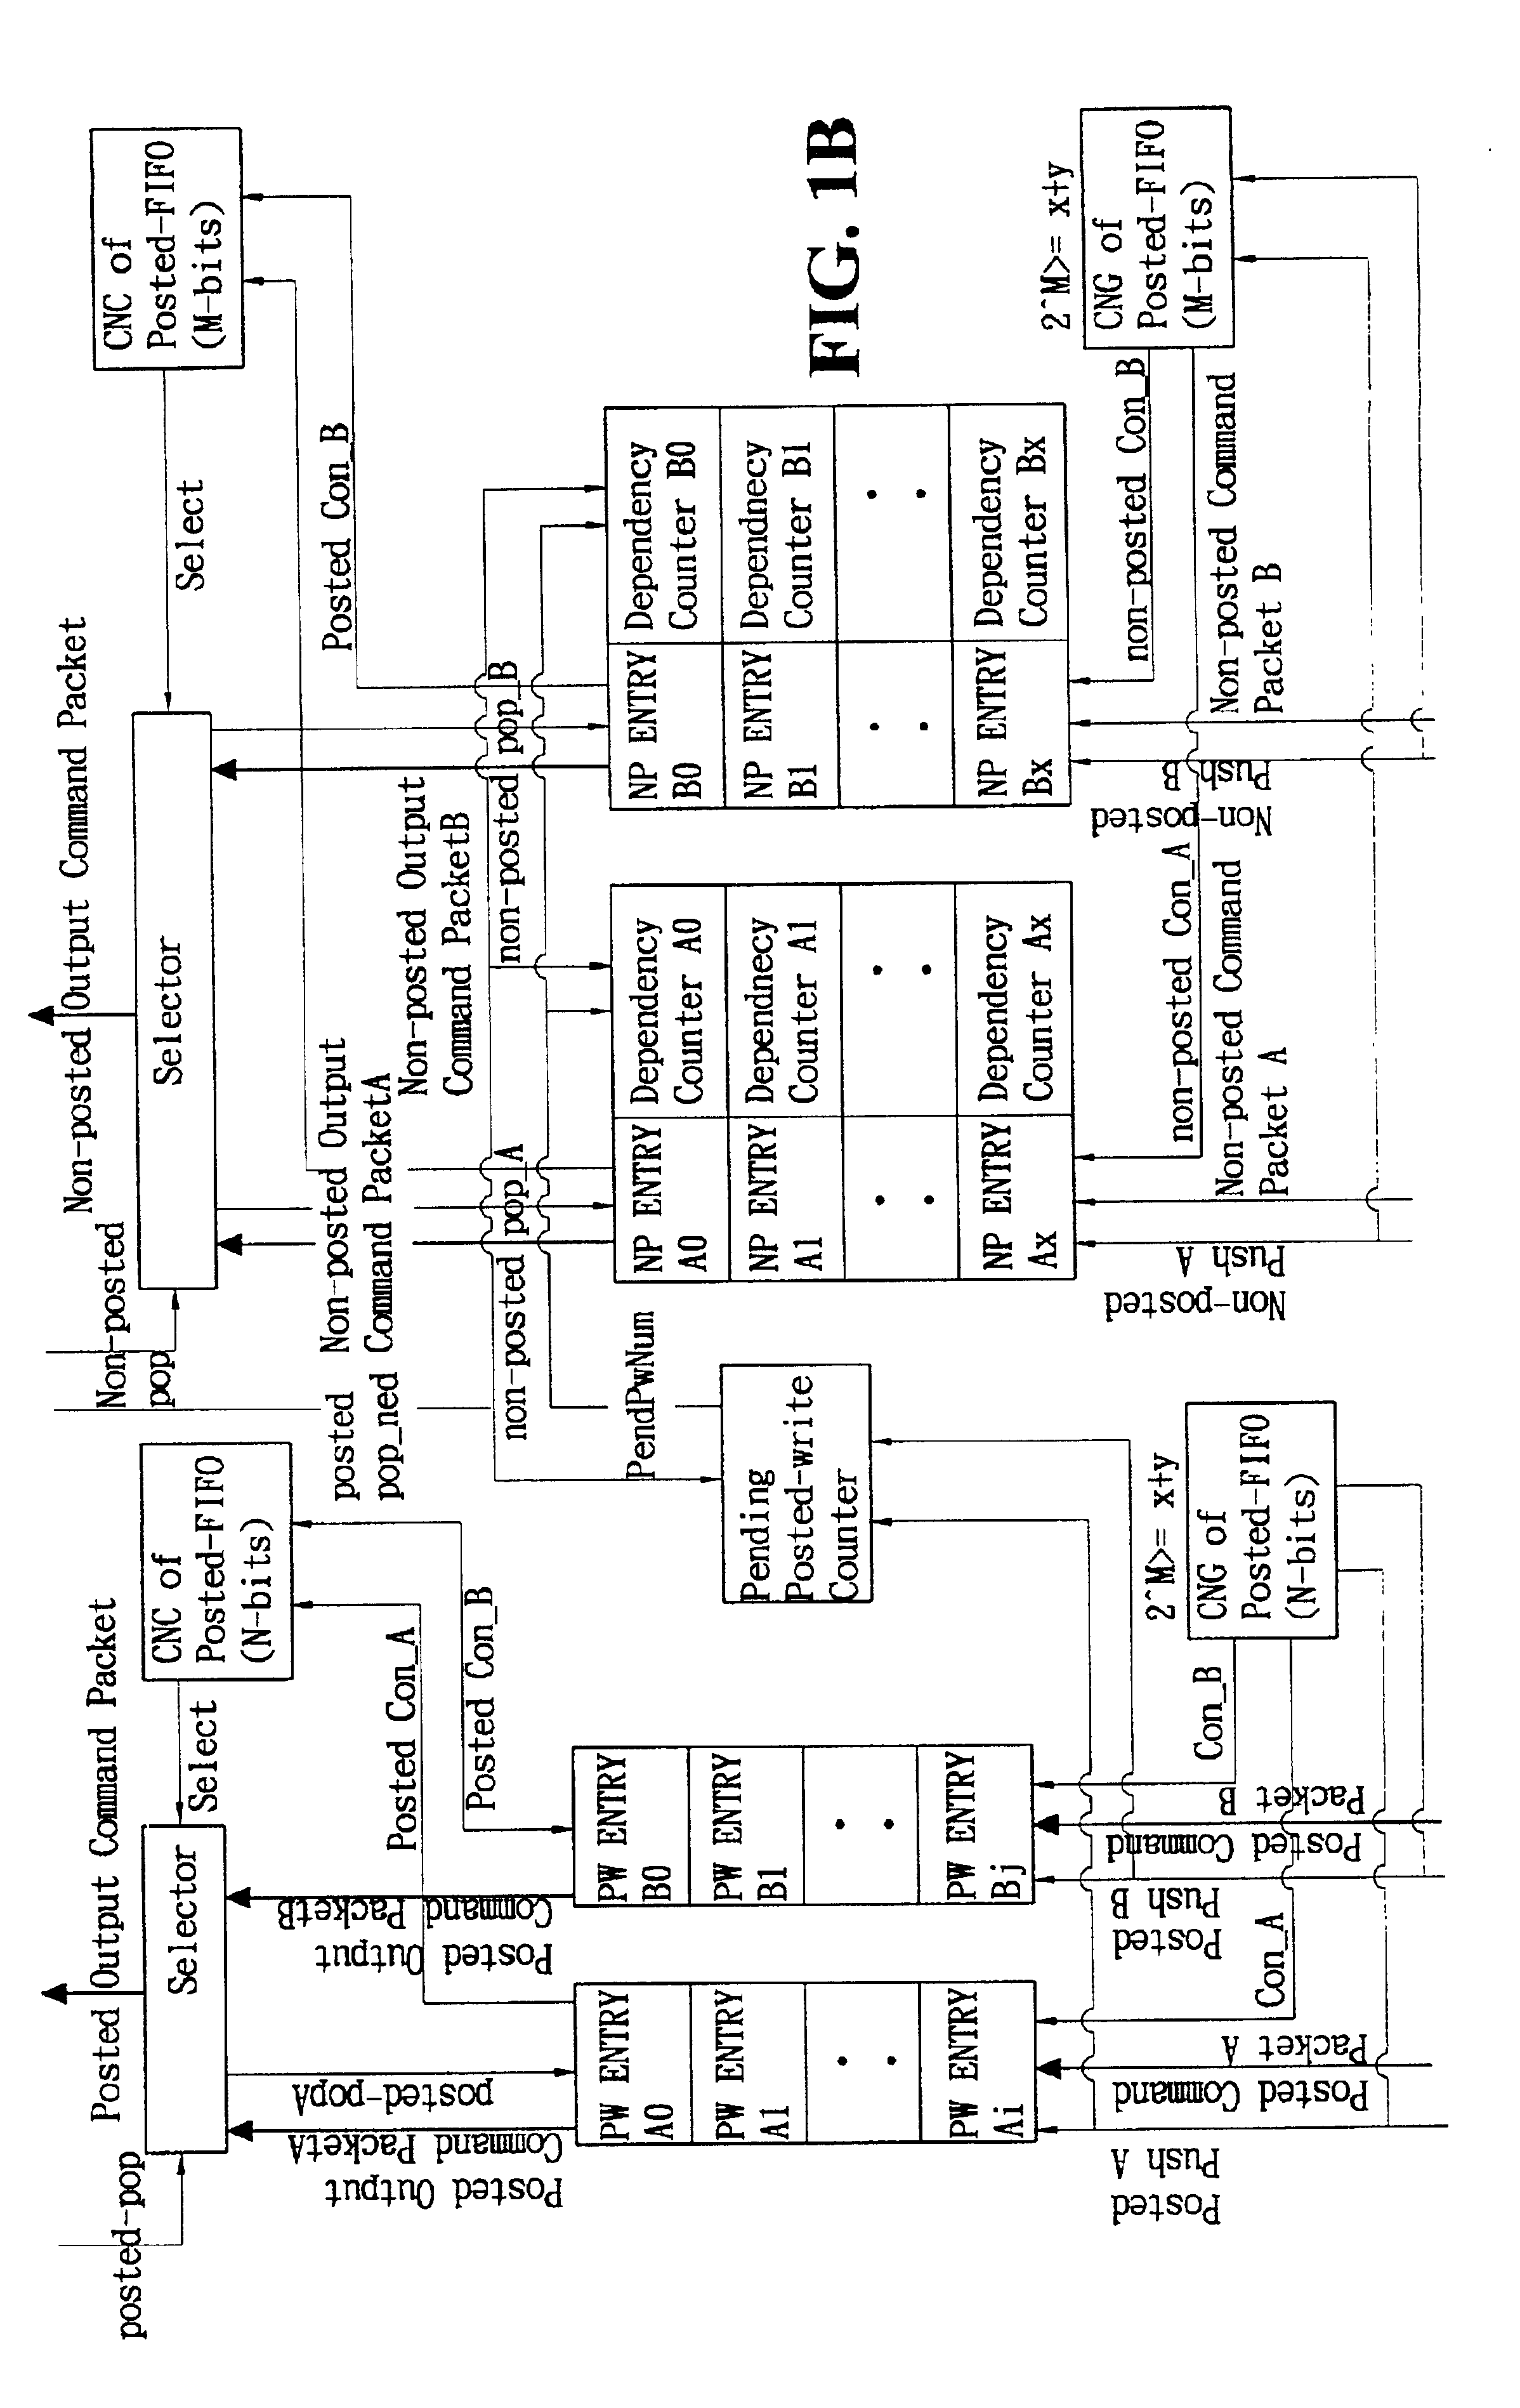 Command order maintenance scheme for multi-in/multi-out FIFO in multi-threaded I/O links